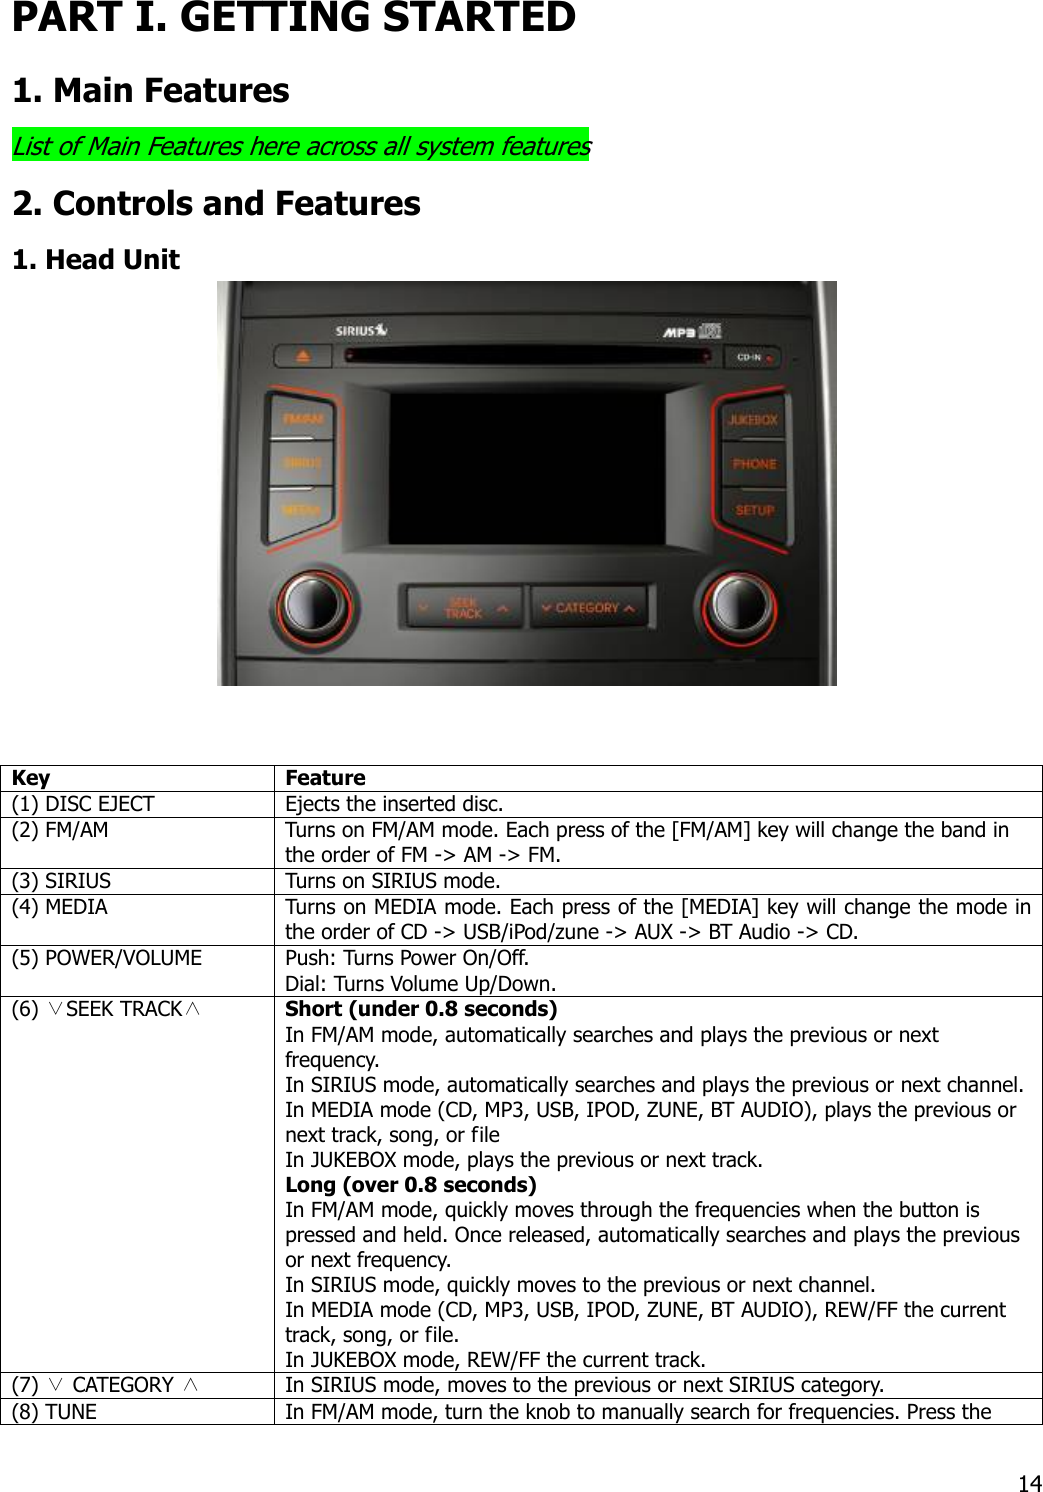 PART I. GETTING STARTED 1. Main Features List of Main Features here across all system features 2. Controls and Features 1. Head Unit   Key Feature (1) DISC EJECT  Ejects the inserted disc. (2) FM/AM  Turns on FM/AM mode. Each press of the [FM/AM] key will change the band in the order of FM -&gt; AM -&gt; FM. (3) SIRIUS  Turns on SIRIUS mode.   (4) MEDIA   Turns on MEDIA mode. Each press of the [MEDIA] key will change the mode in the order of CD -&gt; USB/iPod/zune -&gt; AUX -&gt; BT Audio -&gt; CD. (5) POWER/VOLUME  Push: Turns Power On/Off. Dial: Turns Volume Up/Down. (6) ∨SEEK TRACK∧ Short (under 0.8 seconds) In FM/AM mode, automatically searches and plays the previous or next frequency. In SIRIUS mode, automatically searches and plays the previous or next channel.In MEDIA mode (CD, MP3, USB, IPOD, ZUNE, BT AUDIO), plays the previous or next track, song, or file In JUKEBOX mode, plays the previous or next track.   Long (over 0.8 seconds) In FM/AM mode, quickly moves through the frequencies when the button is pressed and held. Once released, automatically searches and plays the previous or next frequency. In SIRIUS mode, quickly moves to the previous or next channel.   In MEDIA mode (CD, MP3, USB, IPOD, ZUNE, BT AUDIO), REW/FF the current track, song, or file. In JUKEBOX mode, REW/FF the current track.   (7) ∨ CATEGORY ∧  In SIRIUS mode, moves to the previous or next SIRIUS category. (8) TUNE    In FM/AM mode, turn the knob to manually search for frequencies. Press the  14